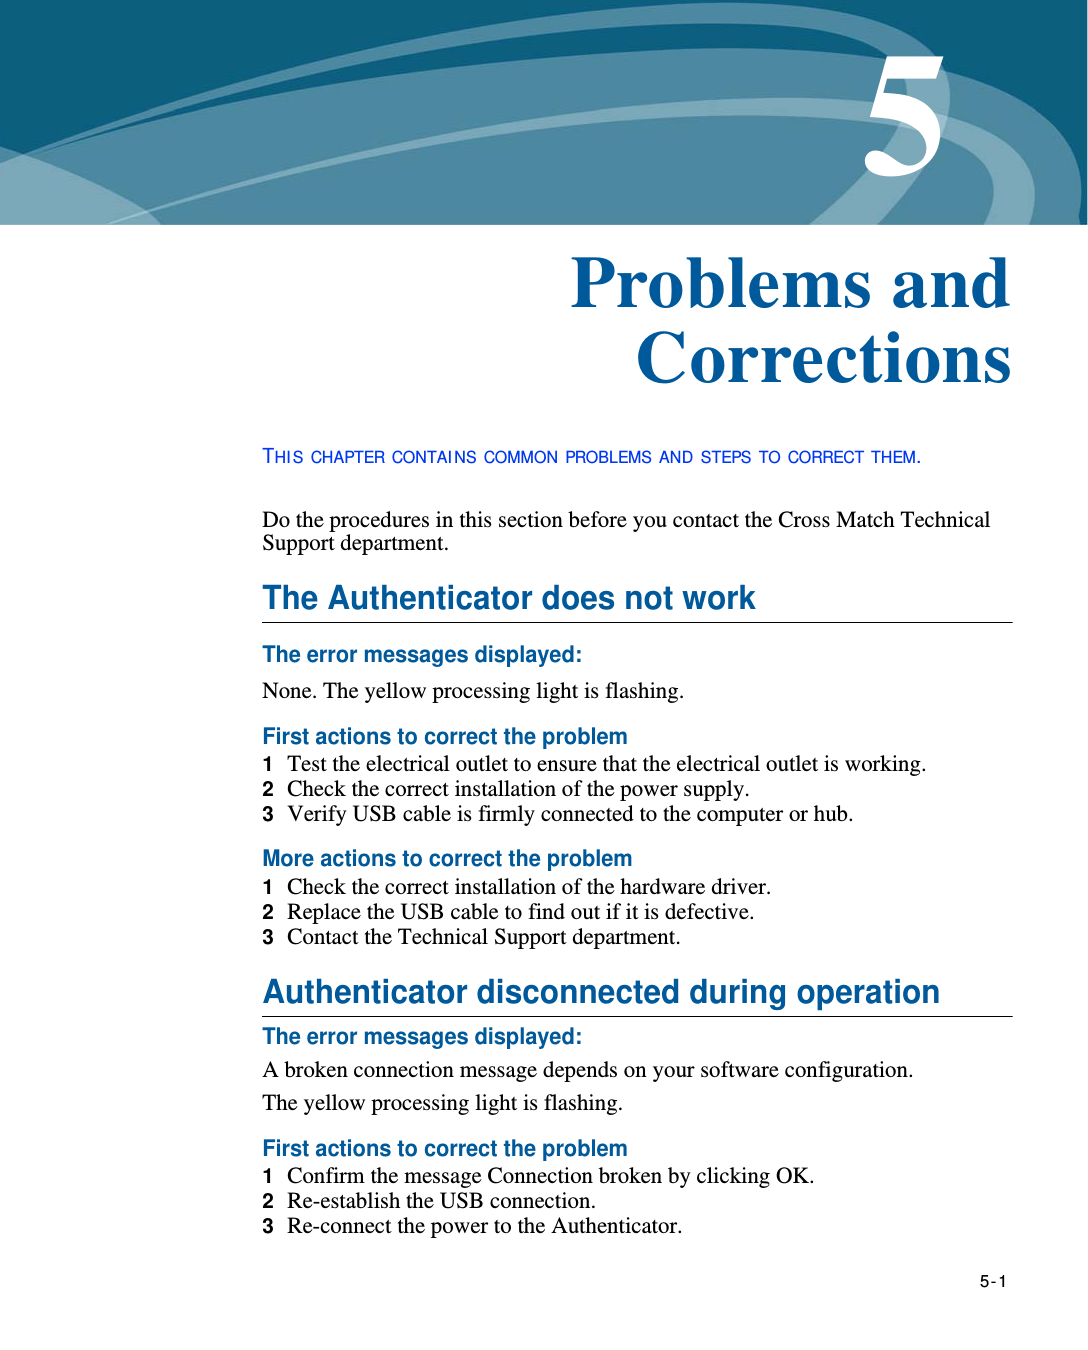   5-15Chapter 0Problems and CorrectionsTHI S CHAPTER CONTAI NS COMMON PROBLEMS AND STEPS TO CORRECT THEM.Do the procedures in this section before you contact the Cross Match Technical Support department.The Authenticator does not workThe error messages displayed:None. The yellow processing light is flashing.First actions to correct the problem1  Test the electrical outlet to ensure that the electrical outlet is working.2  Check the correct installation of the power supply.3  Verify USB cable is firmly connected to the computer or hub.More actions to correct the problem1  Check the correct installation of the hardware driver.2  Replace the USB cable to find out if it is defective.3  Contact the Technical Support department.Authenticator disconnected during operationThe error messages displayed:A broken connection message depends on your software configuration. The yellow processing light is flashing.First actions to correct the problem1  Confirm the message Connection broken by clicking OK.2  Re-establish the USB connection.3  Re-connect the power to the Authenticator.